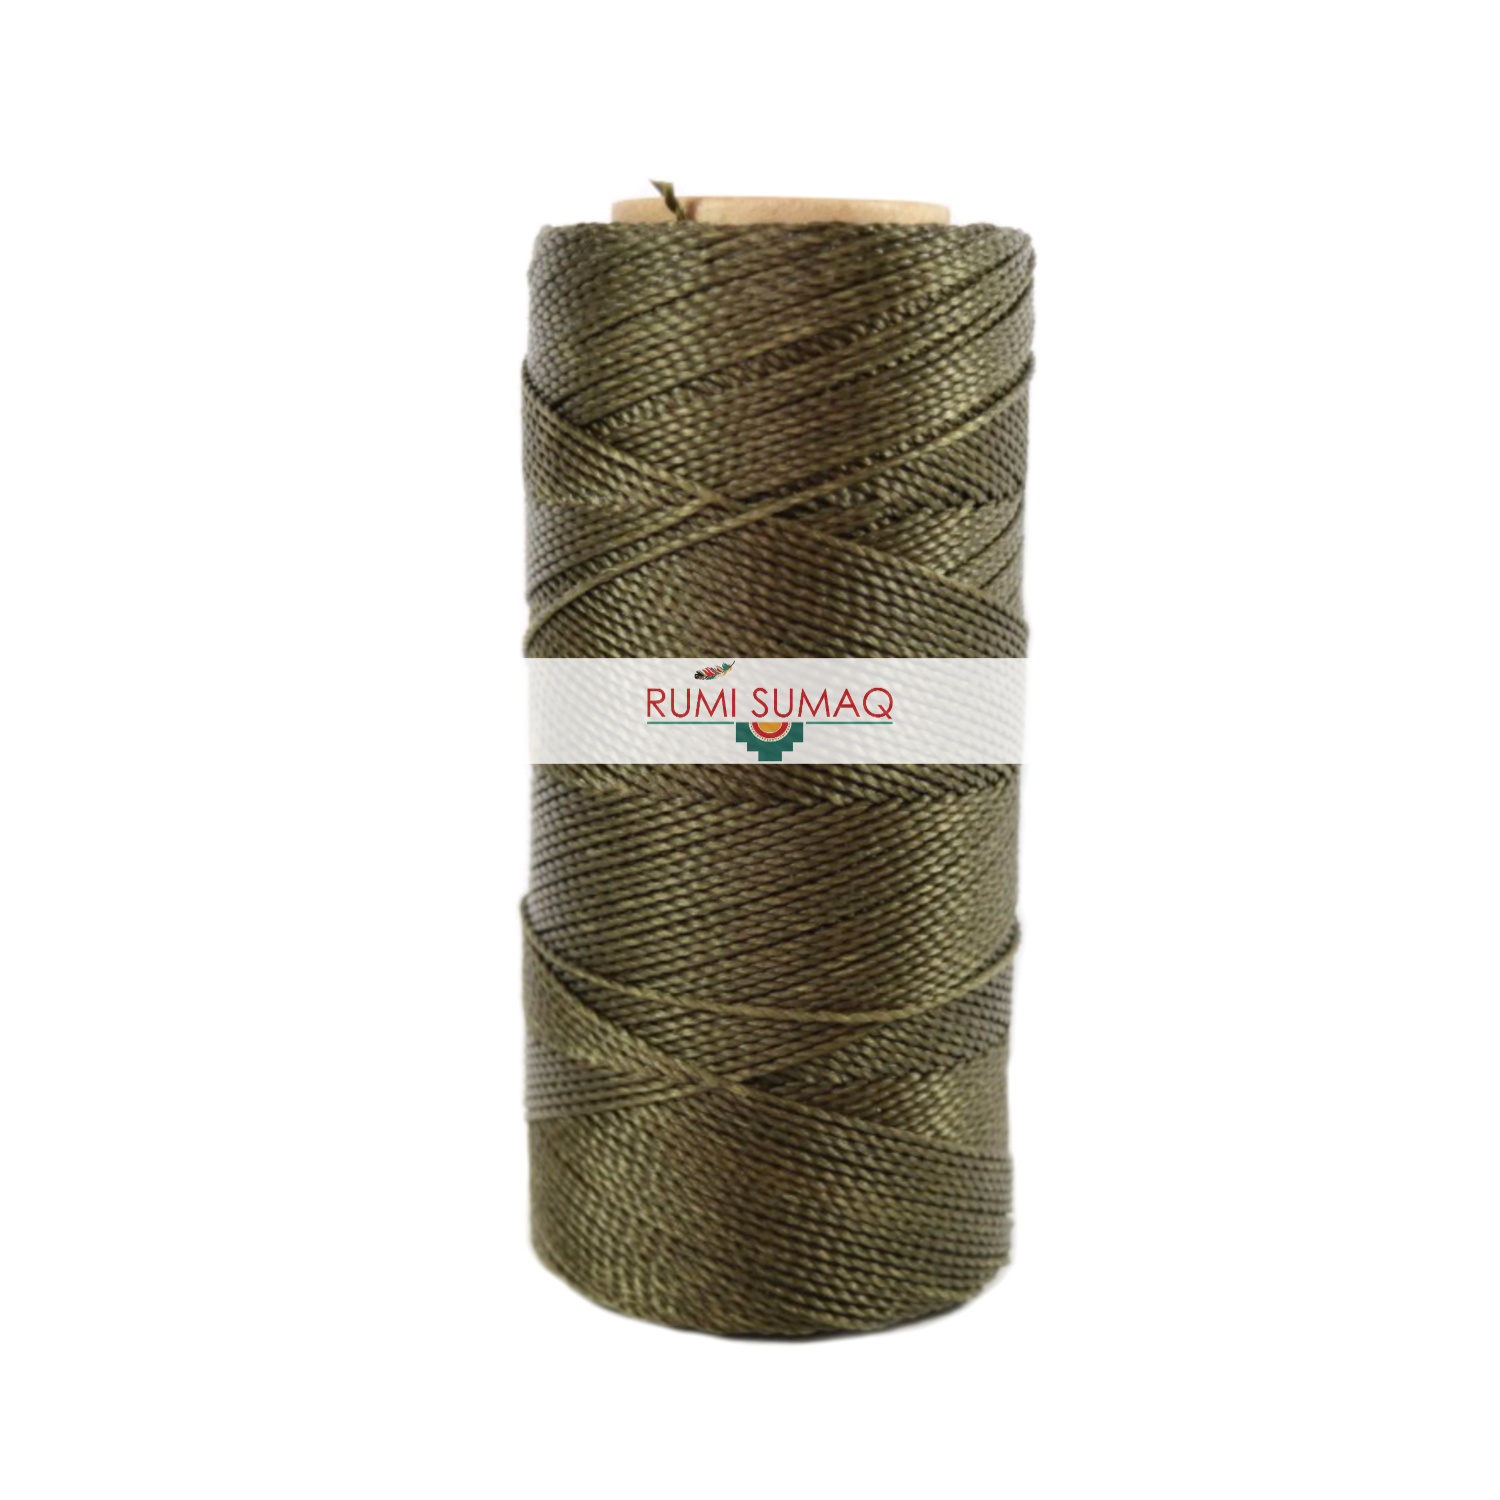 Linhasita 221 Moss Green Waxed Polyester Cord 1mm | Rumi Sumaq Waxed Thread for Macrame Knotting, Basket Making, Leather Working, Quilting, Beading, Hand Stiitching, and Macrame Jewelry